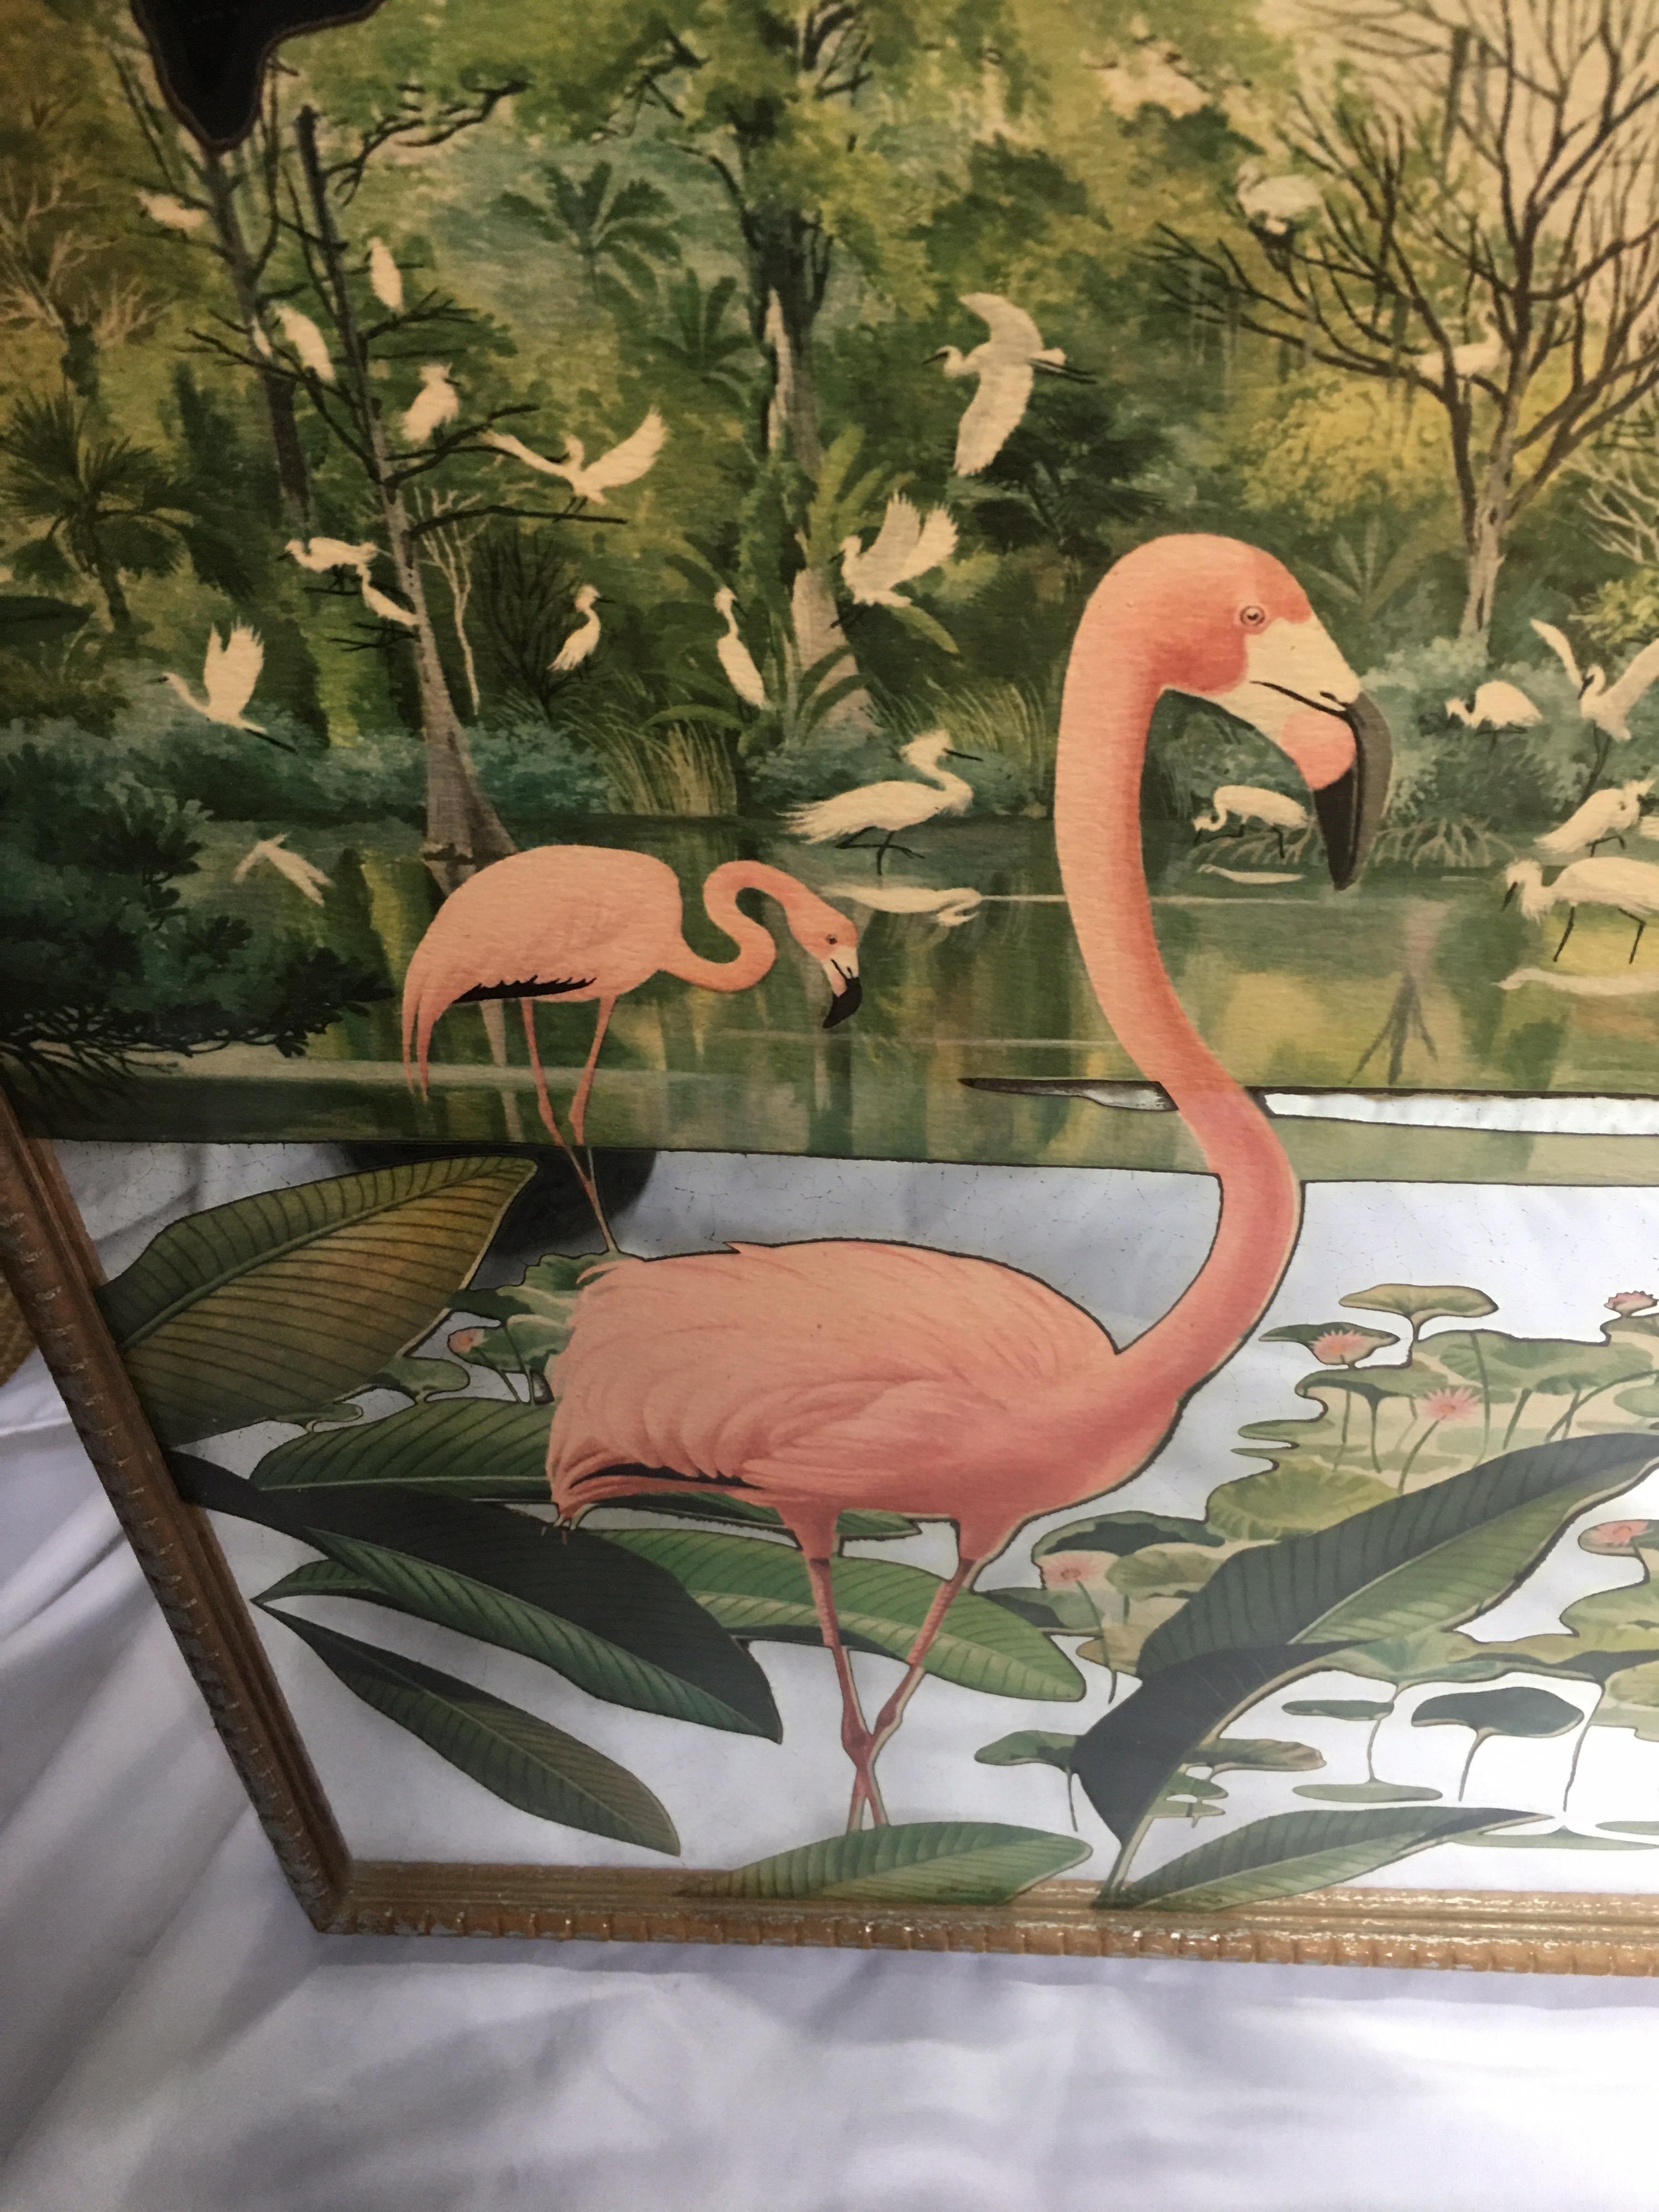 Hollywood Regency decorative wall mirror featuring a painted tropical design of pink flamingos and palm leaves. This midcentury mirrored art piece is framed in a gold/silver tone wood frame, circa mid-20th century. Pair available.